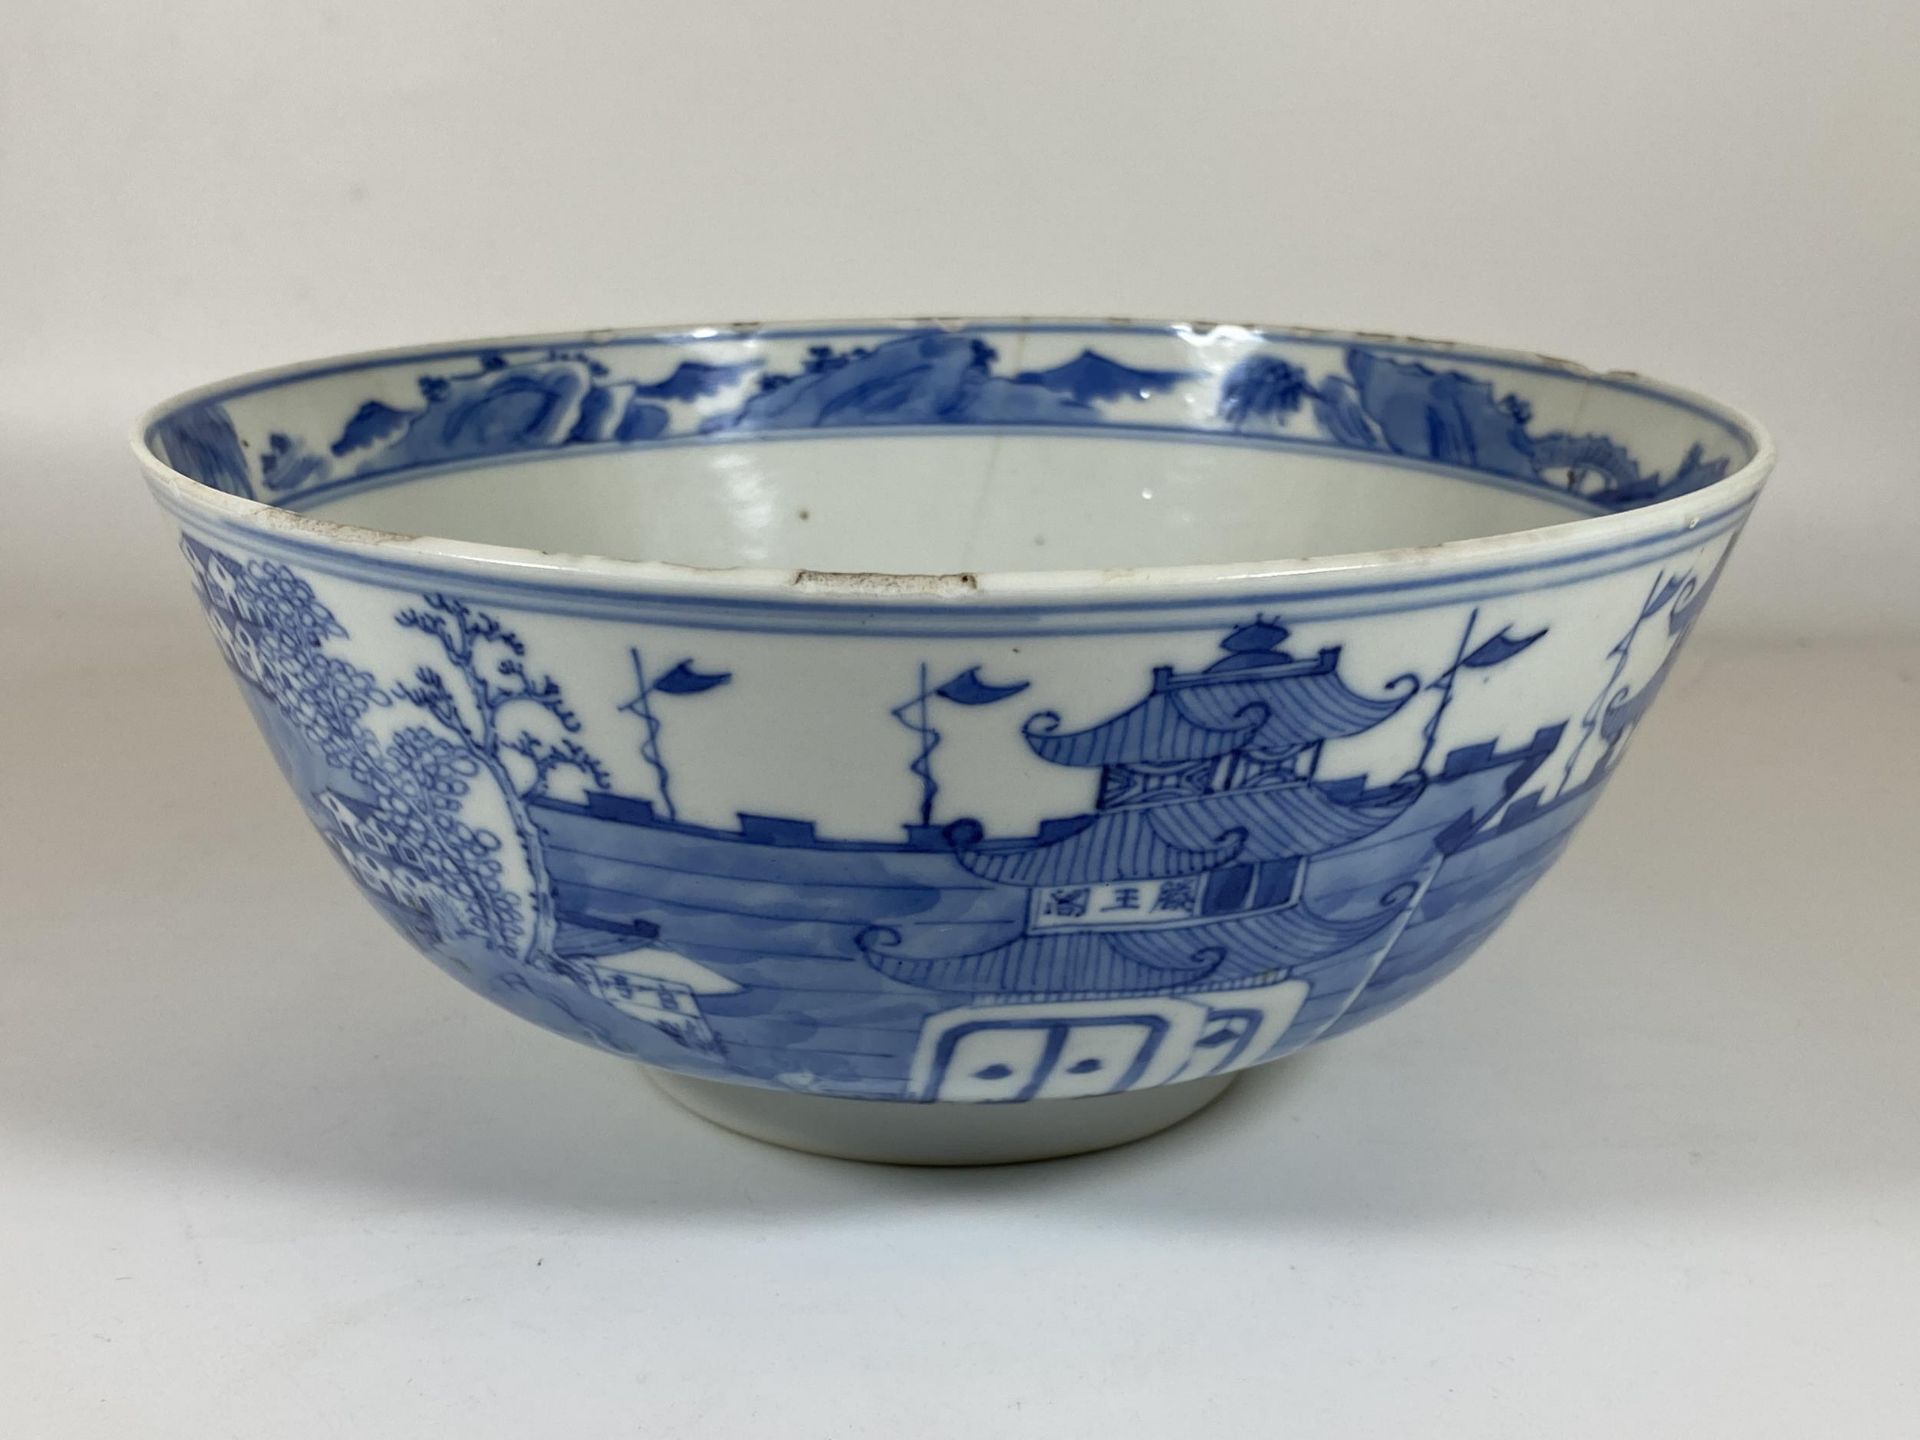 AN 18TH CENTURY CHINESE BLUE AND WHITE QING PORCELAIN BOWL WITH PAGODA DESIGN, FOUR CHARACTER DOUBLE